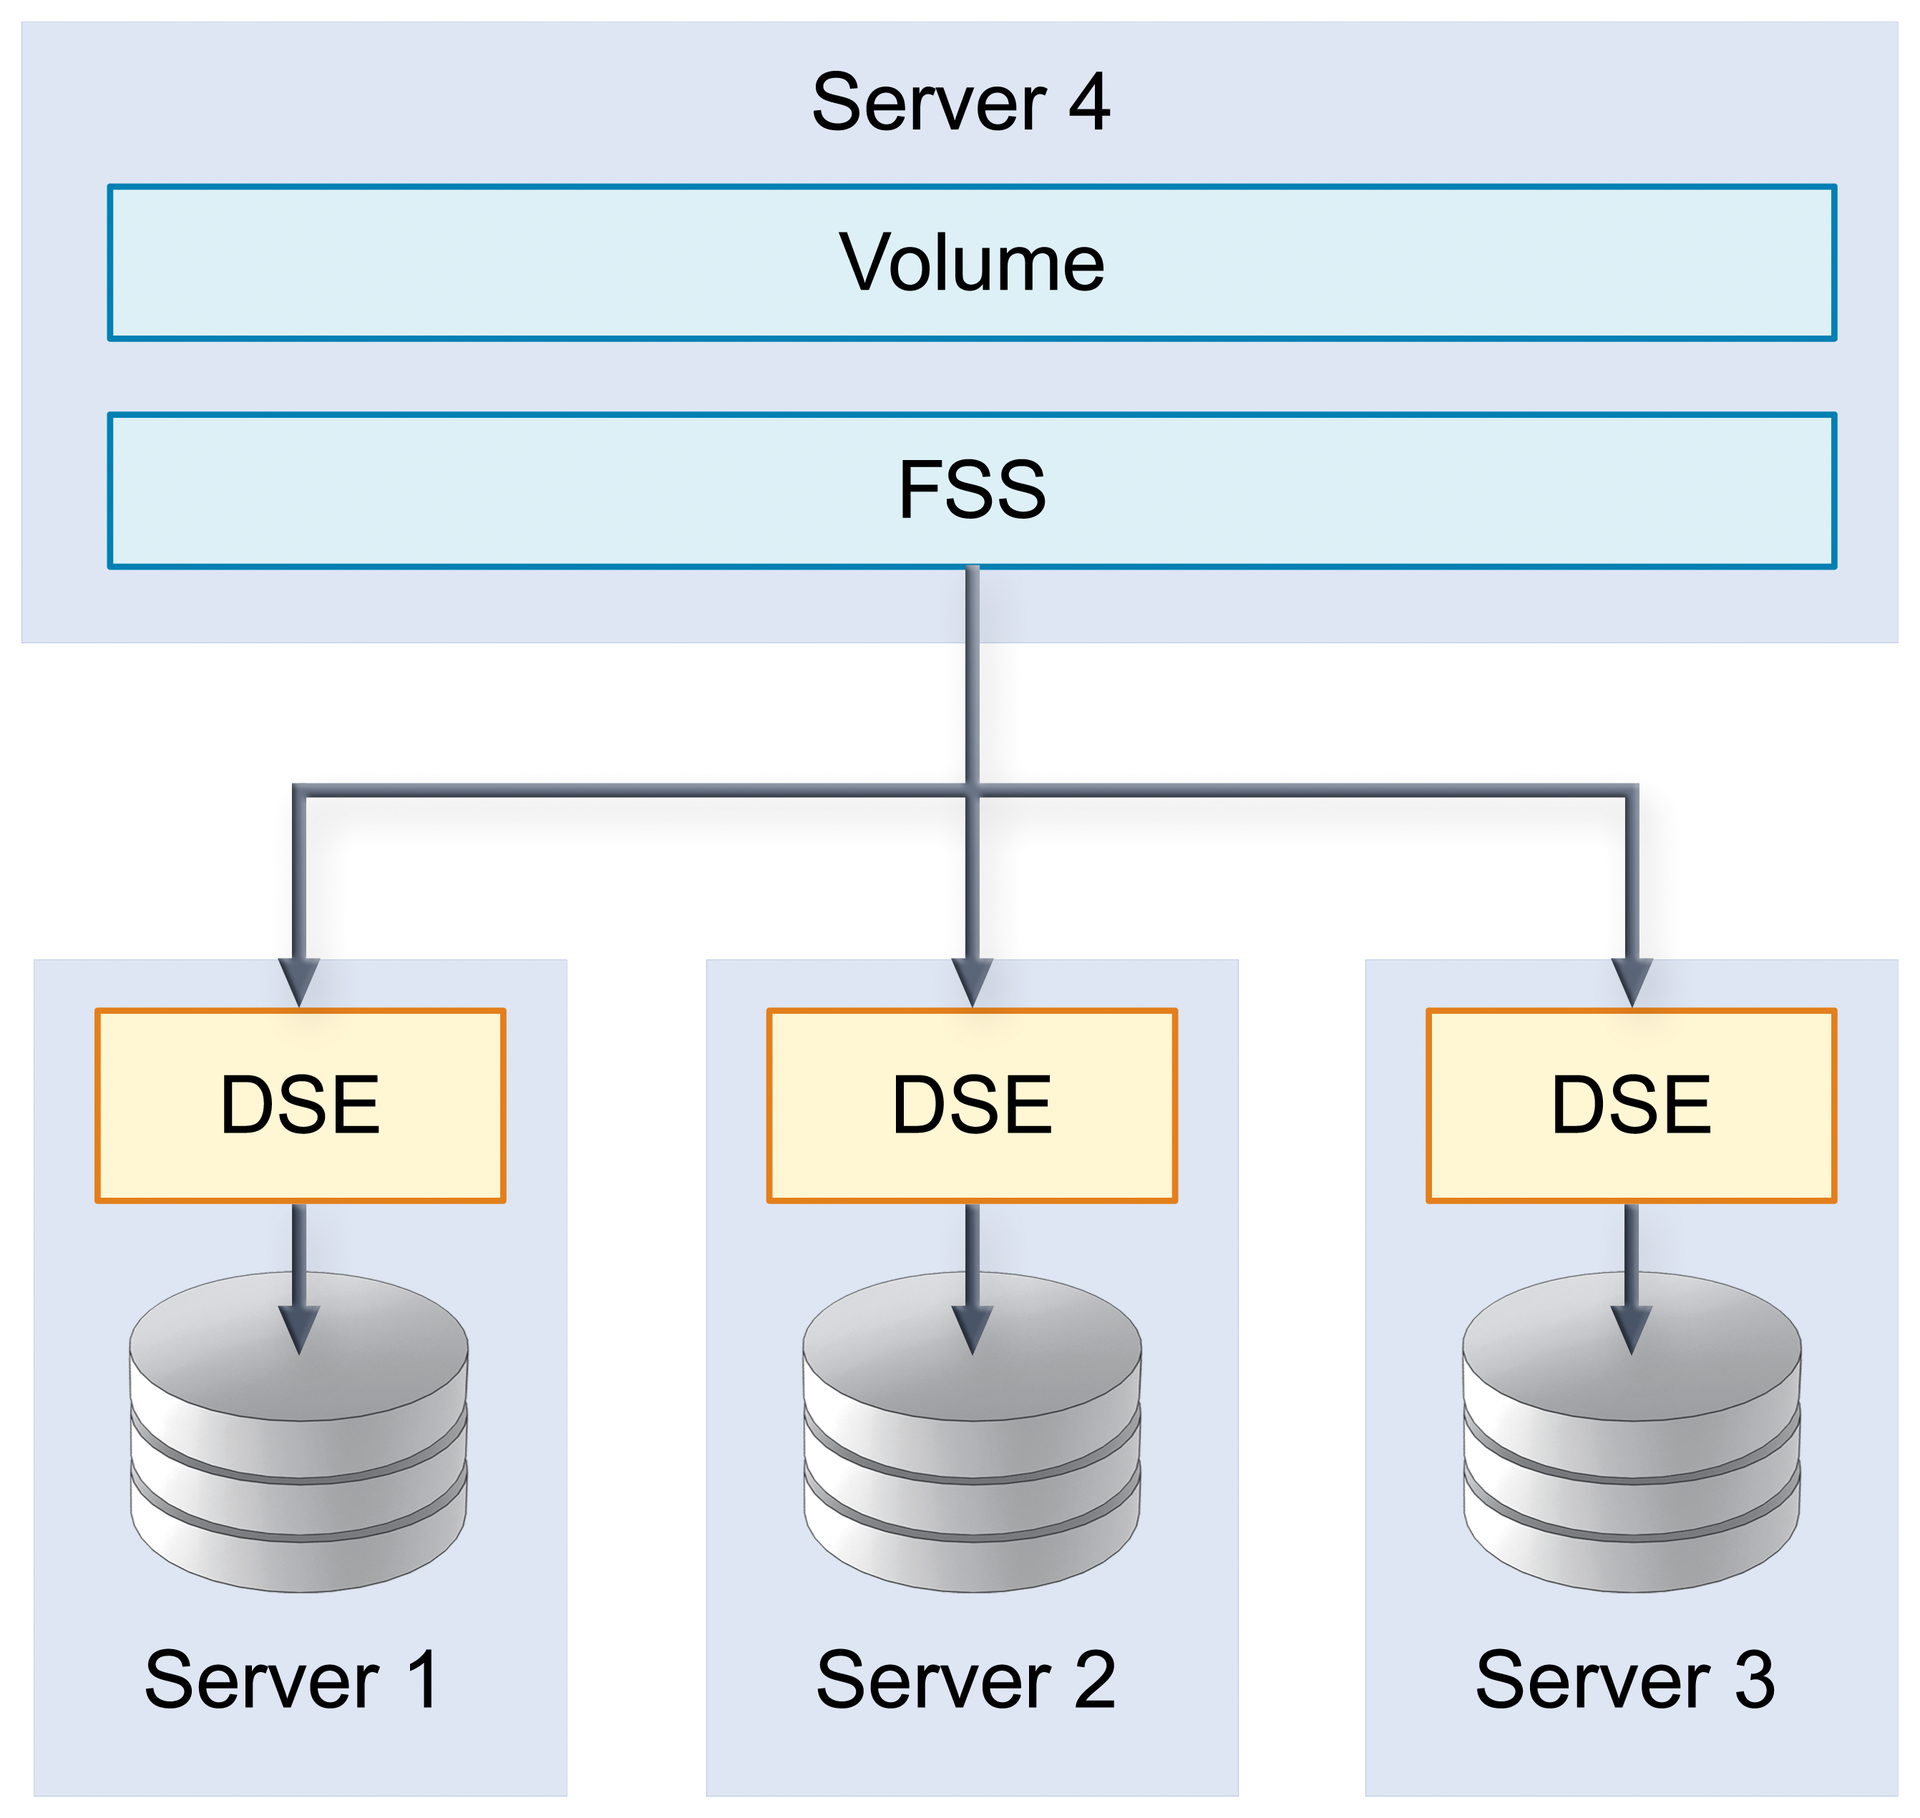 DSEs provide storage space, which the FSS then uses to provide a volume. 